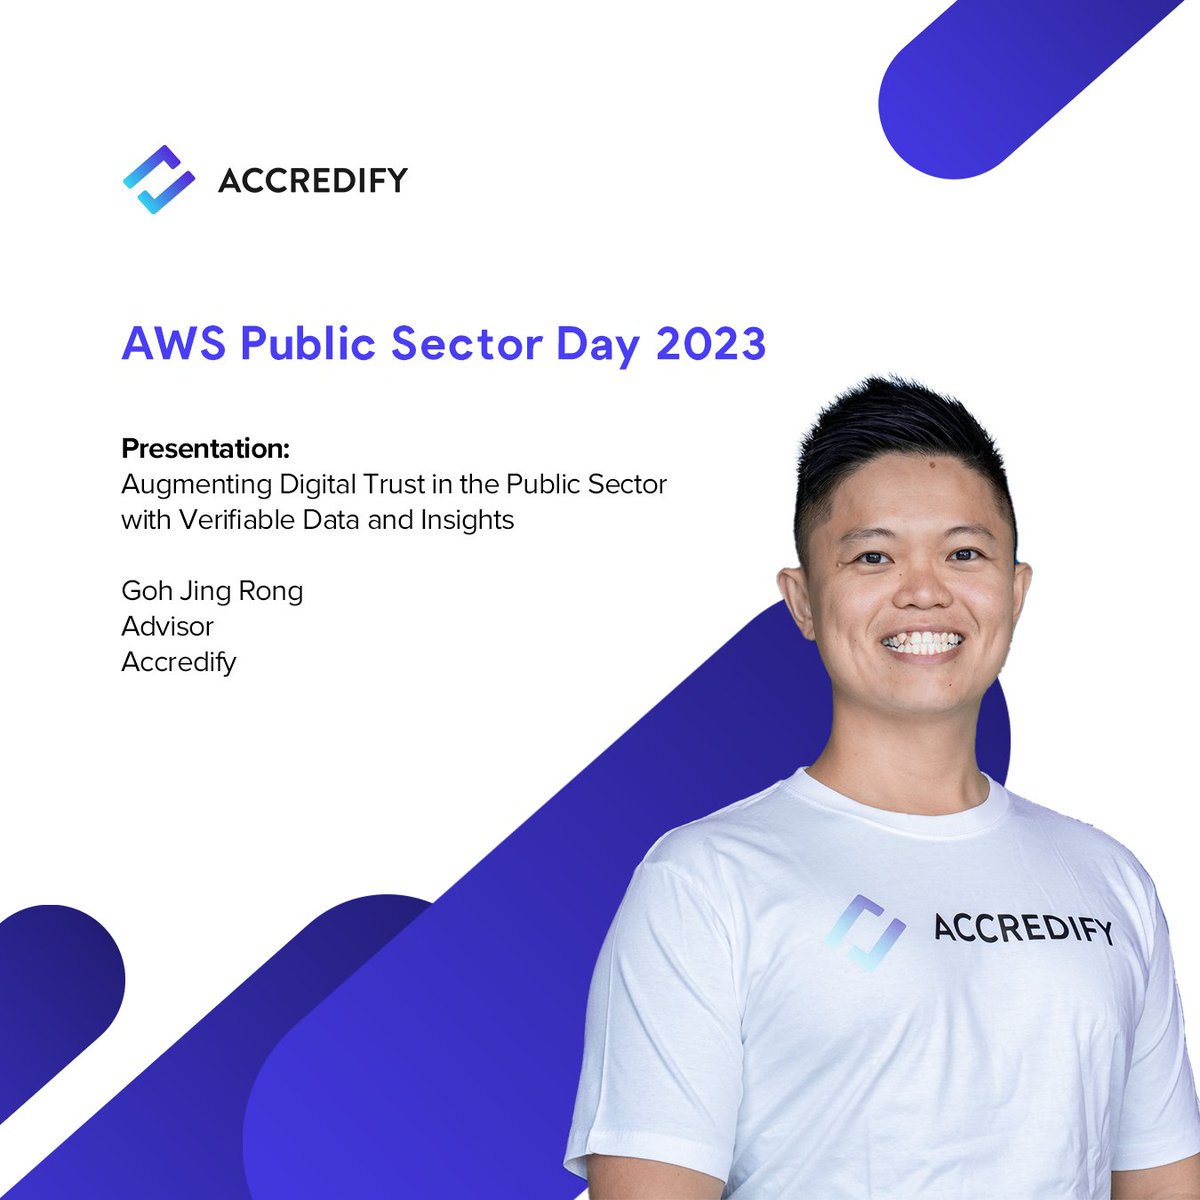 @Accredify_io  was invited to share more about how #digitaltrust can be bolstered with #verifiabledata and insights for @awscloud Public Sector Day! Thank you for the opportunity! If you’d like to learn more about our solution, jump on a call with us here: accredify.io/schedule-demo/…